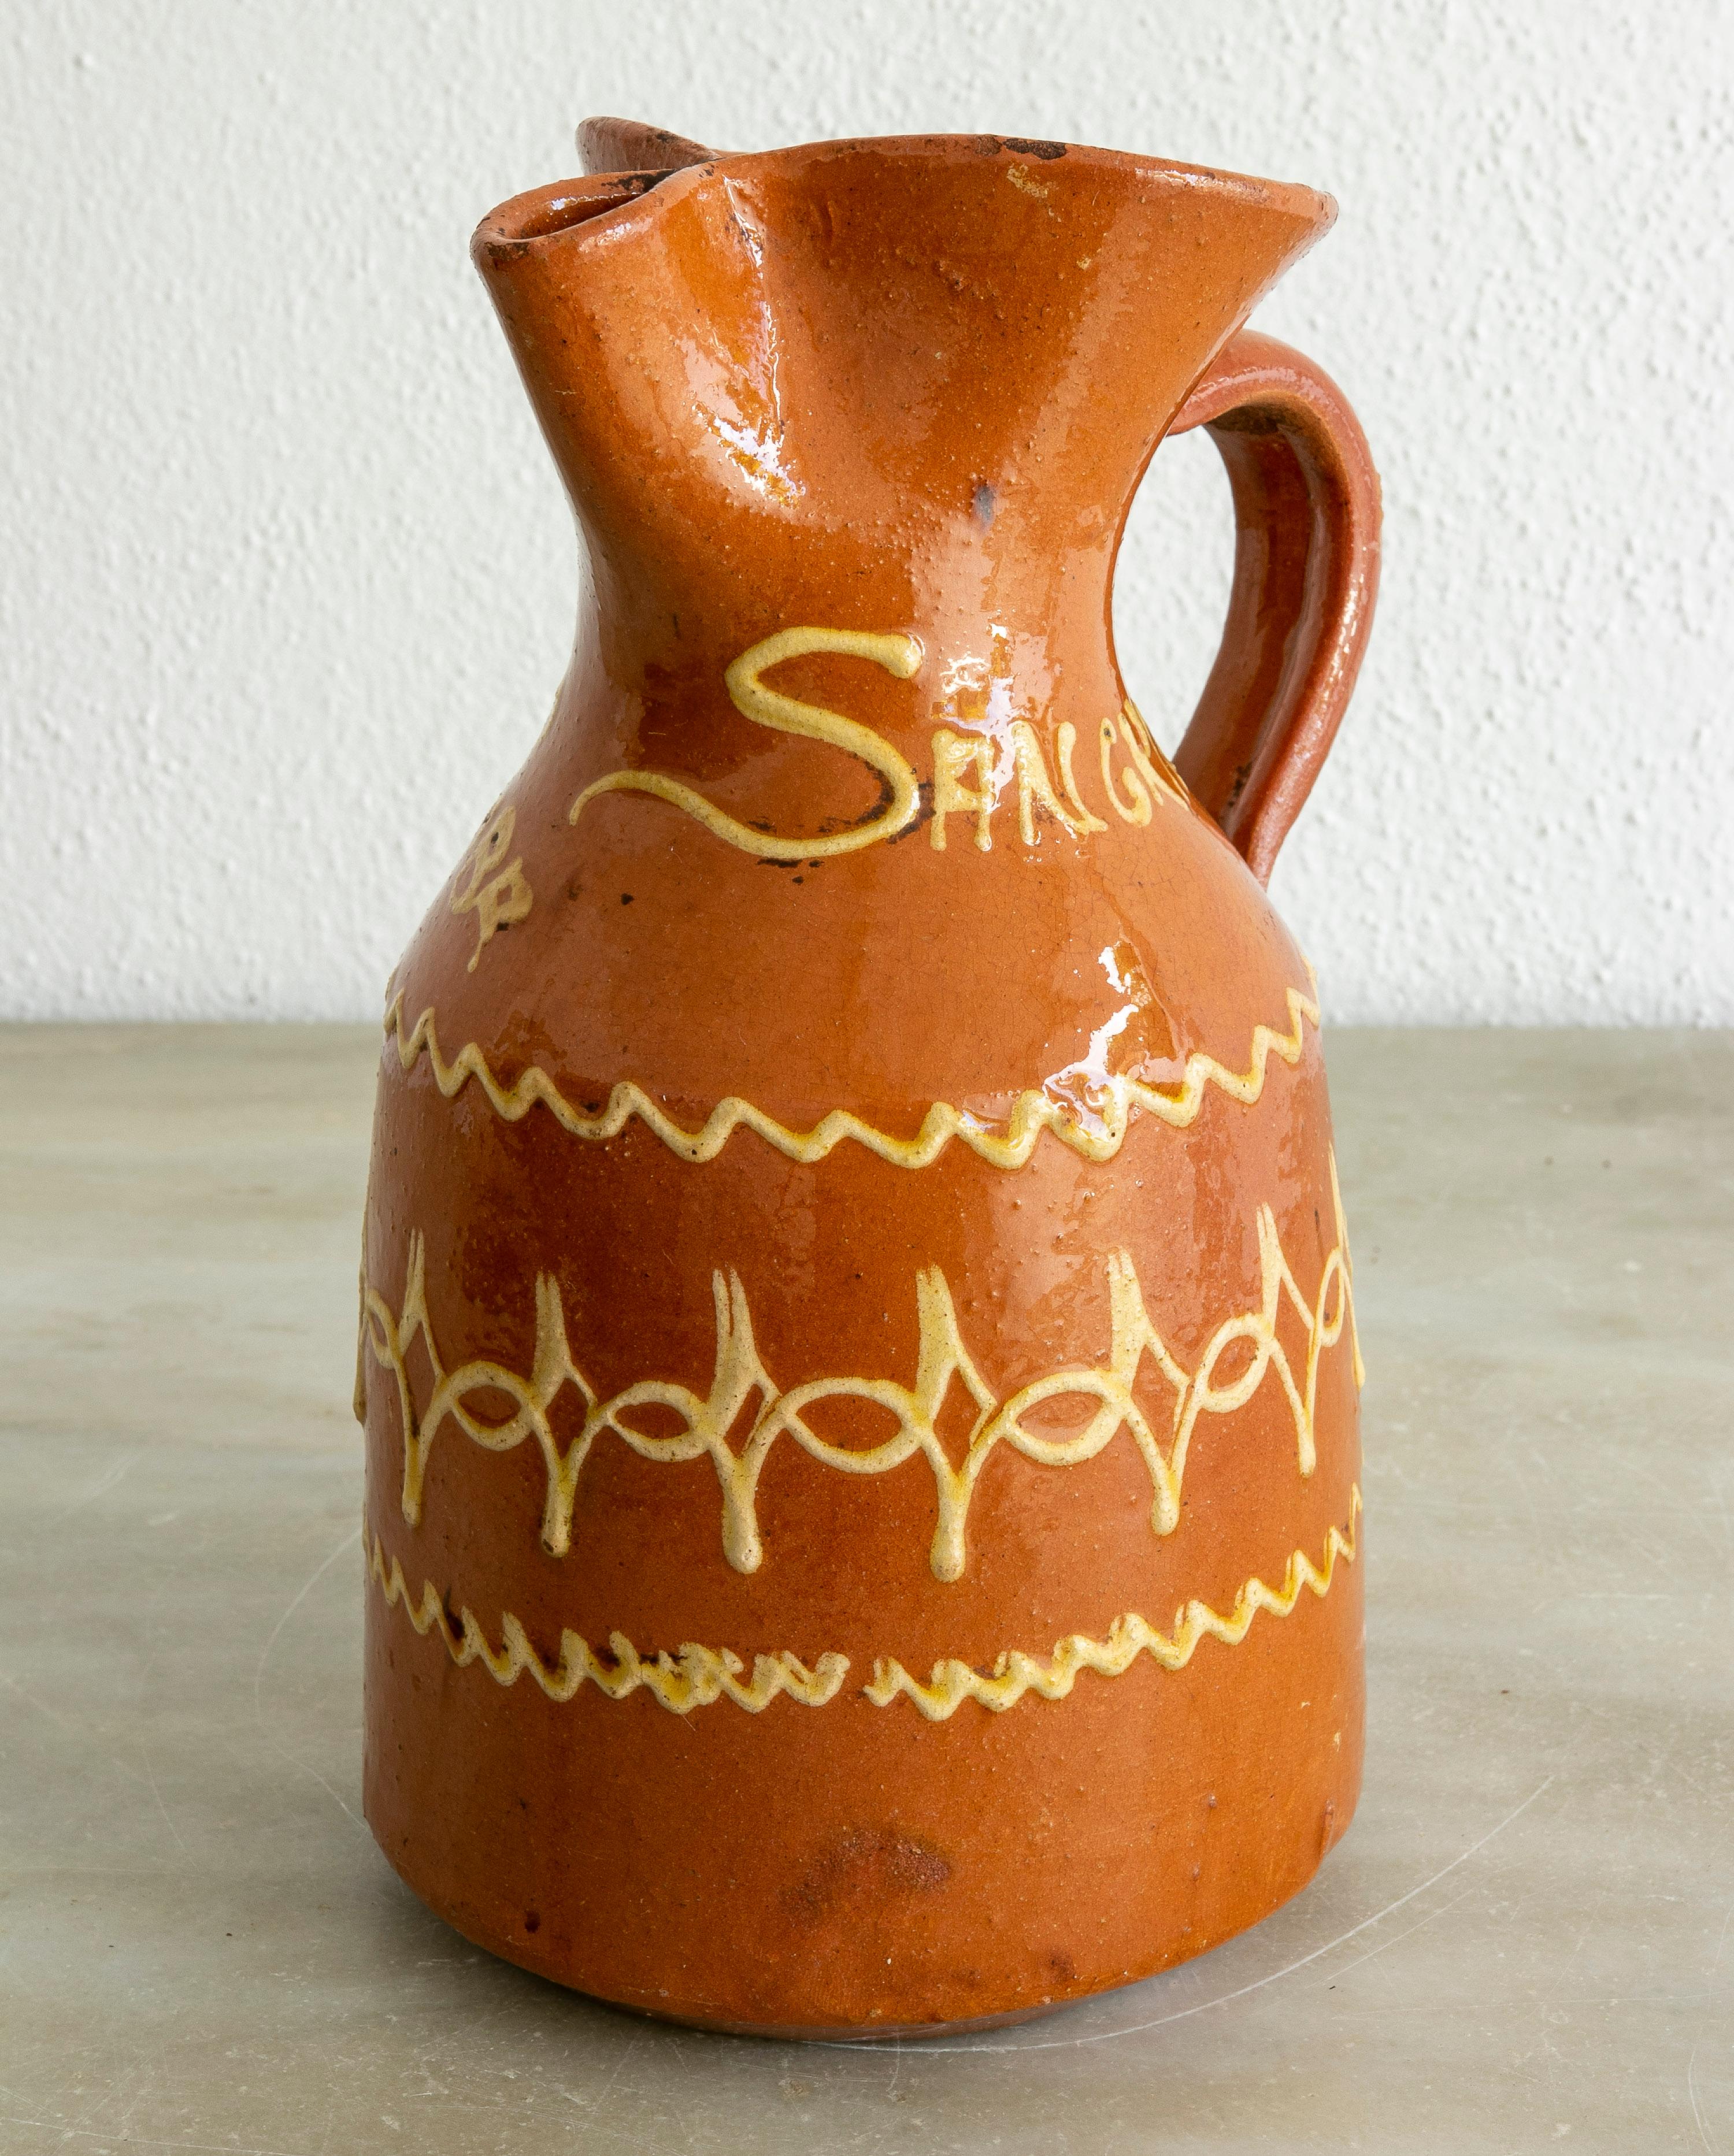 Vintage 1980s Spanish glazed ceramic jug for sangria, a refreshing summer drink made with a mix of wine, soda, lemon juice, pealed & cut fruits and lots of ice. 

It reads 